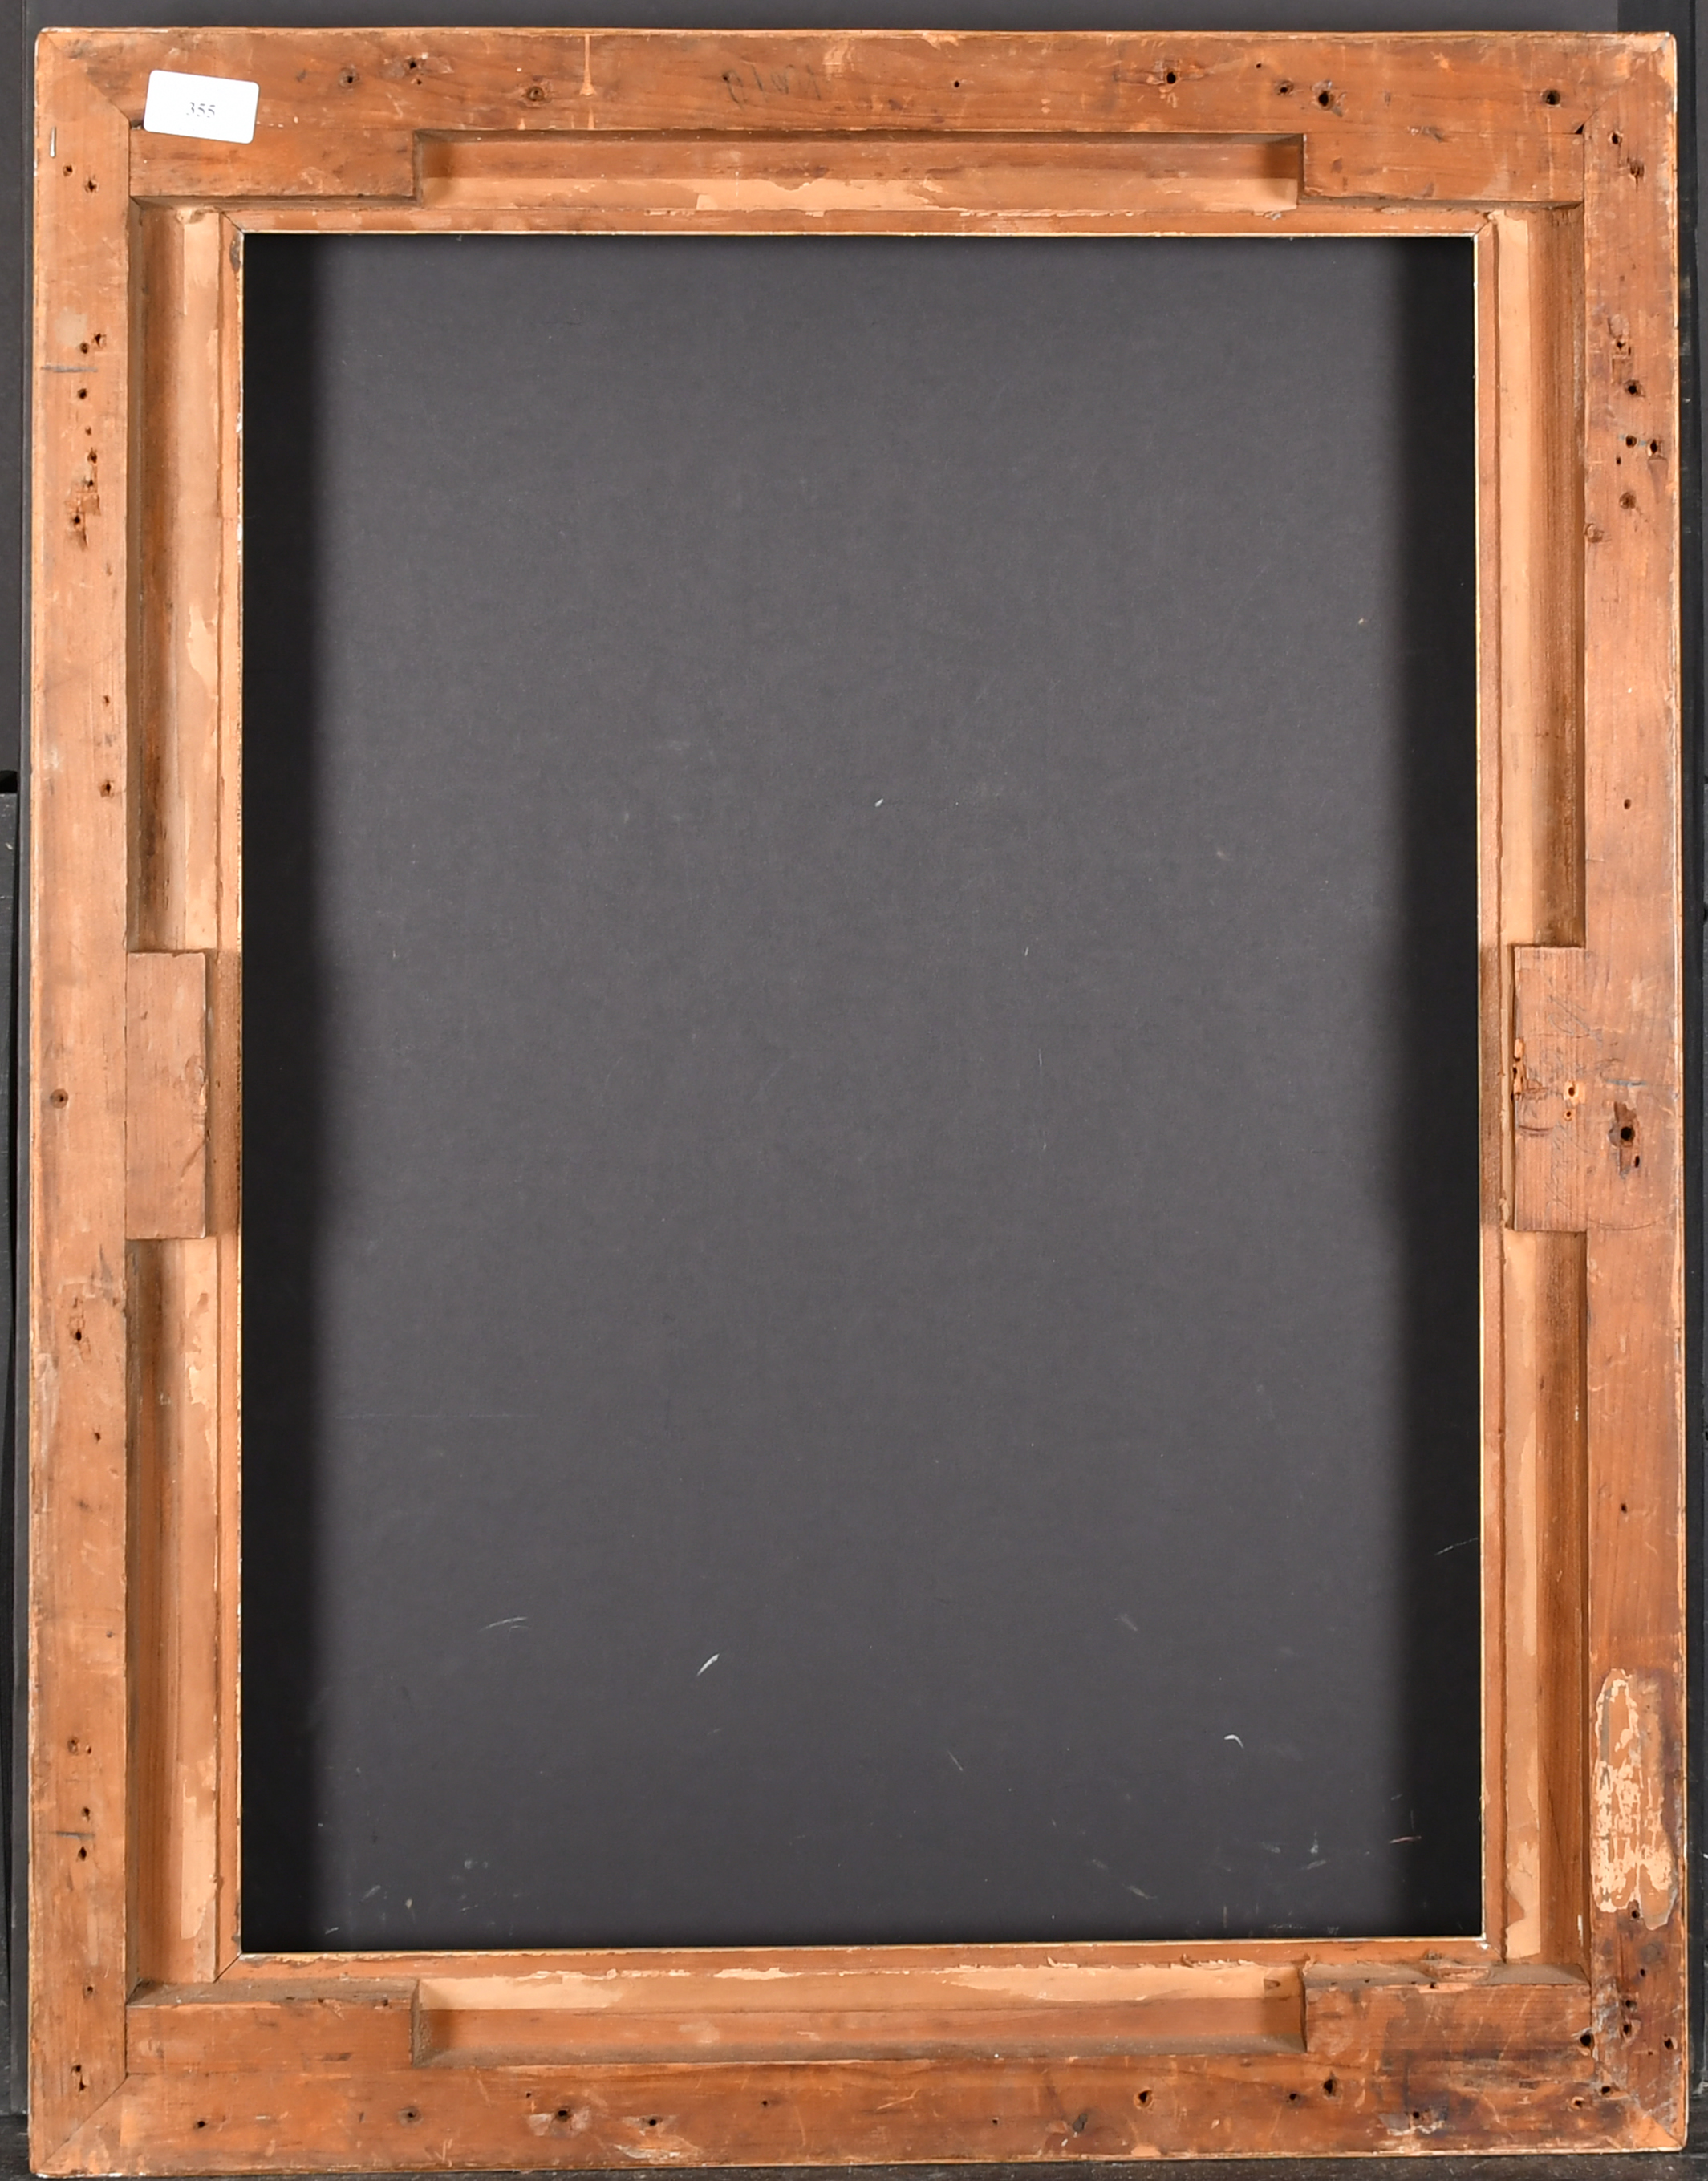 19th Century English School. A Hollow Gilt Composition Frame, rebate 24.5" x 18" (62.2 x 45.7cm) - Image 3 of 3